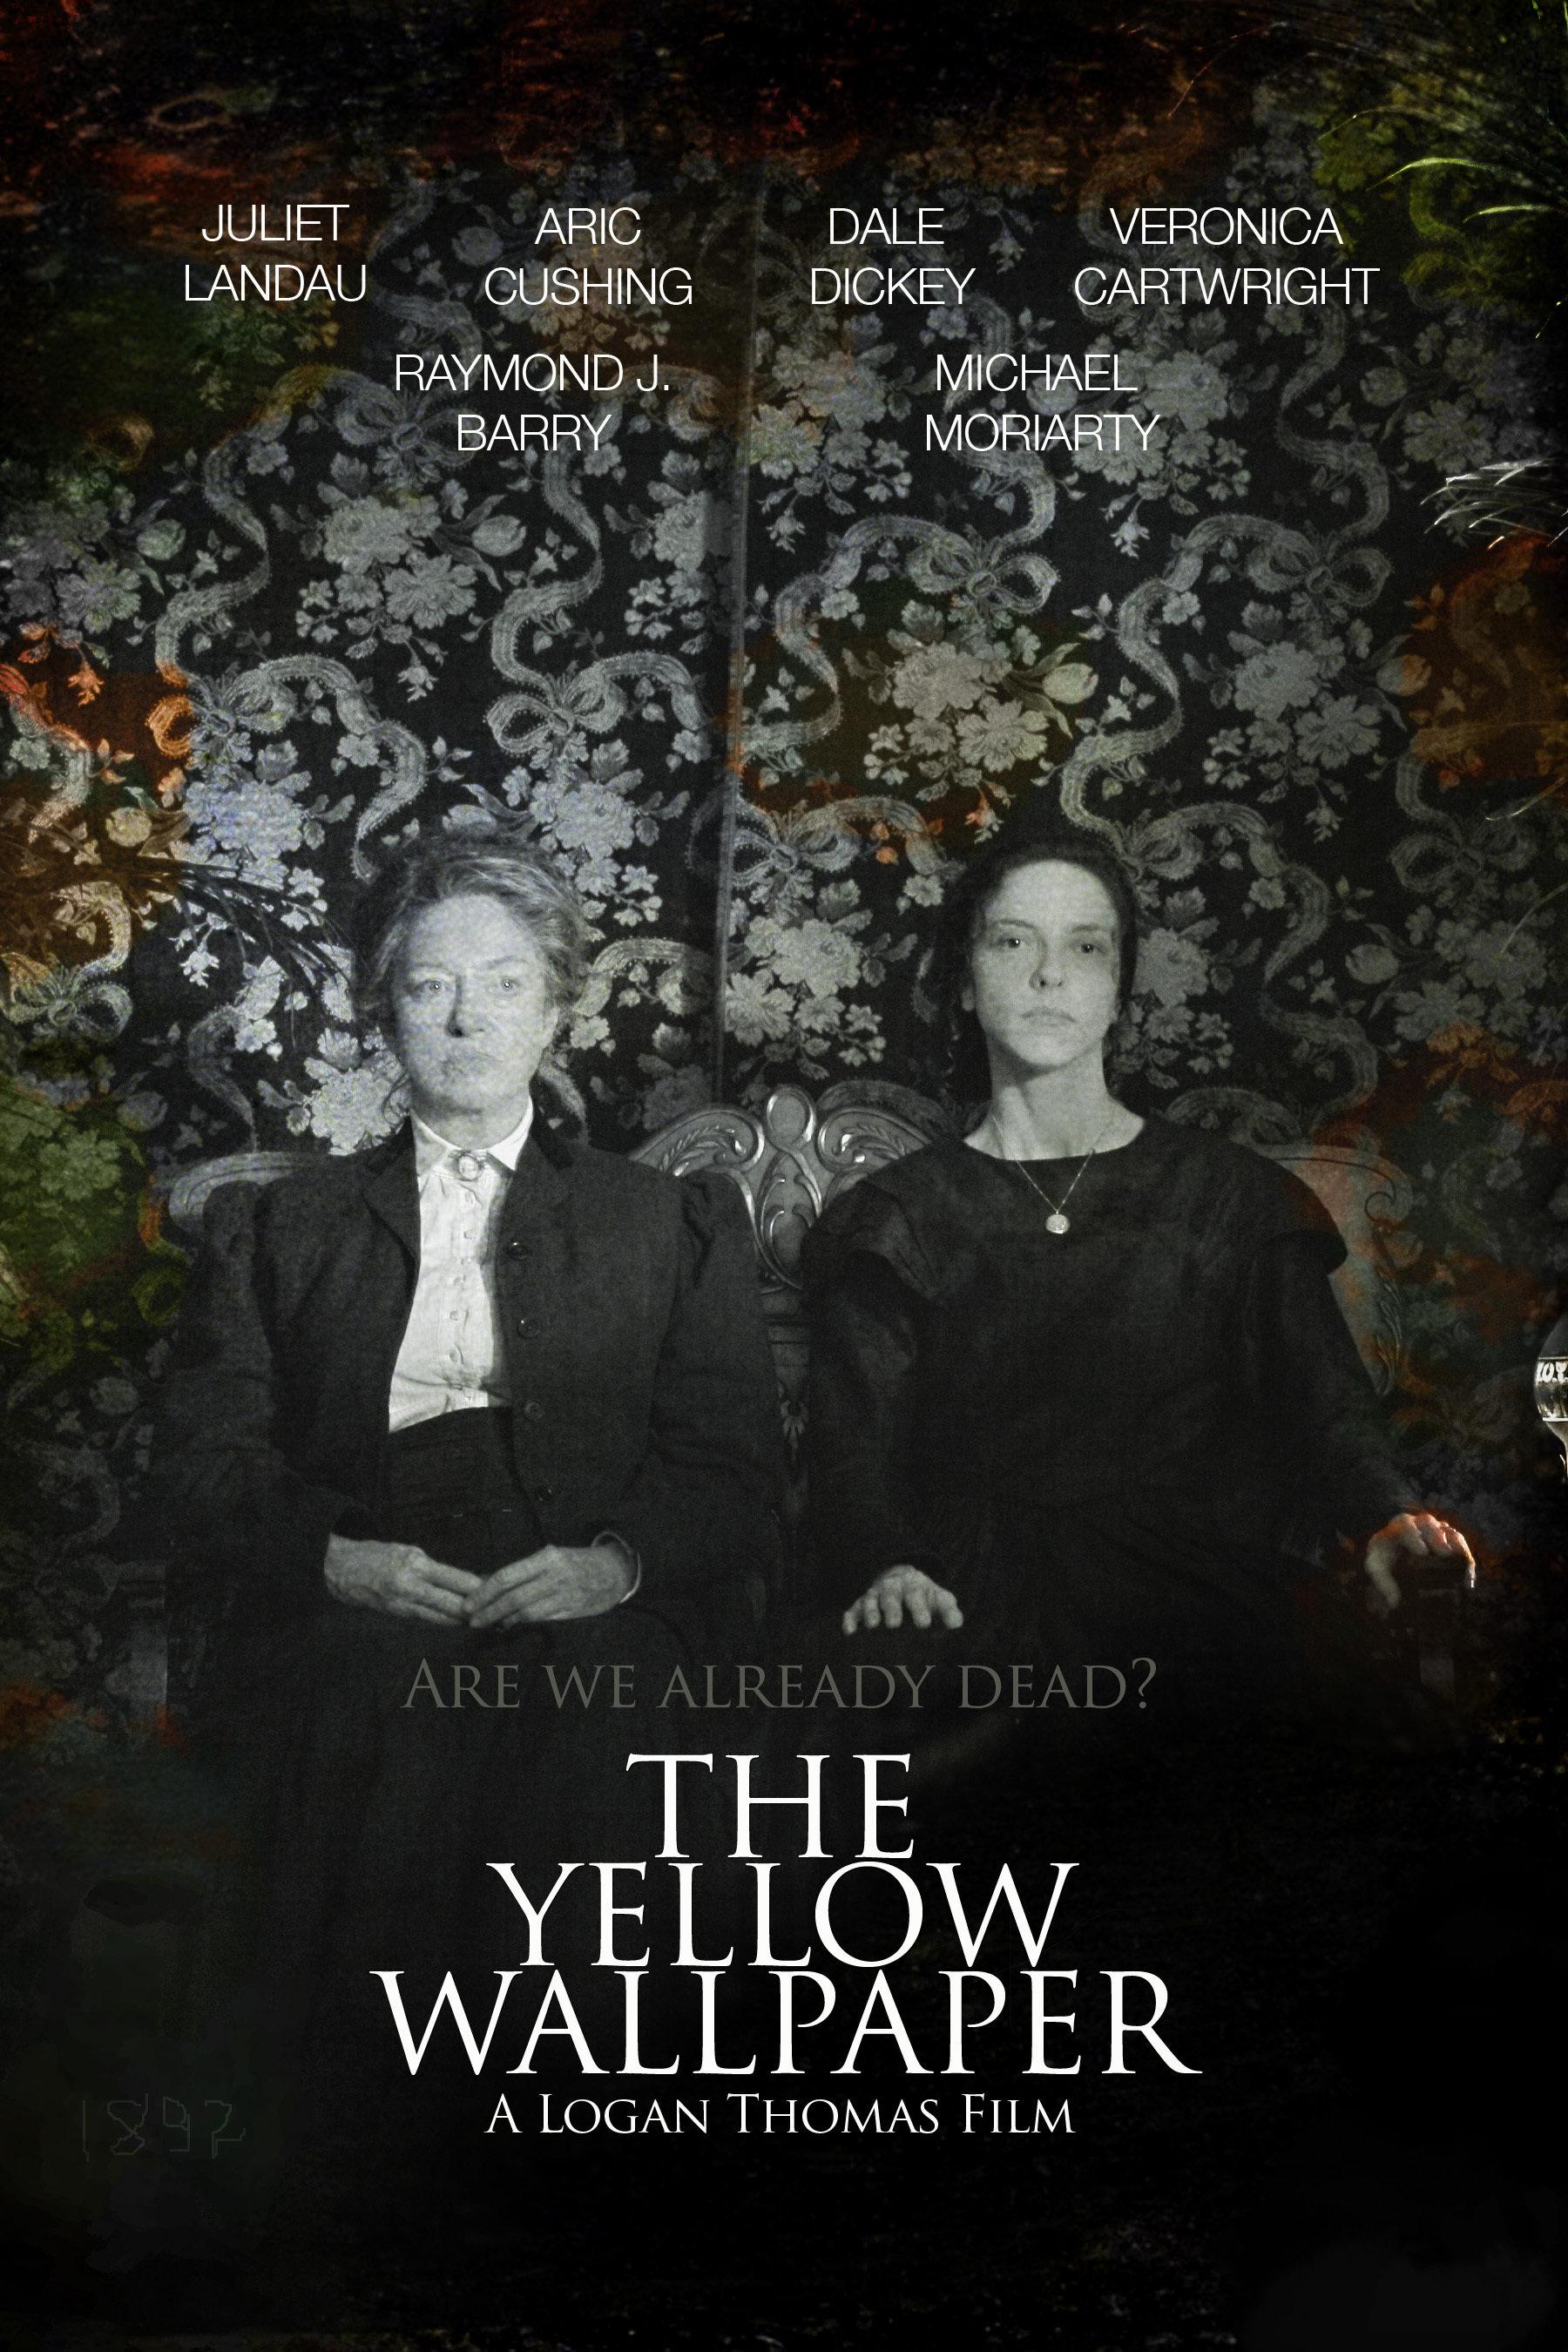 The Yellow Wallpaper Film Release Date Specs Re Redesign And